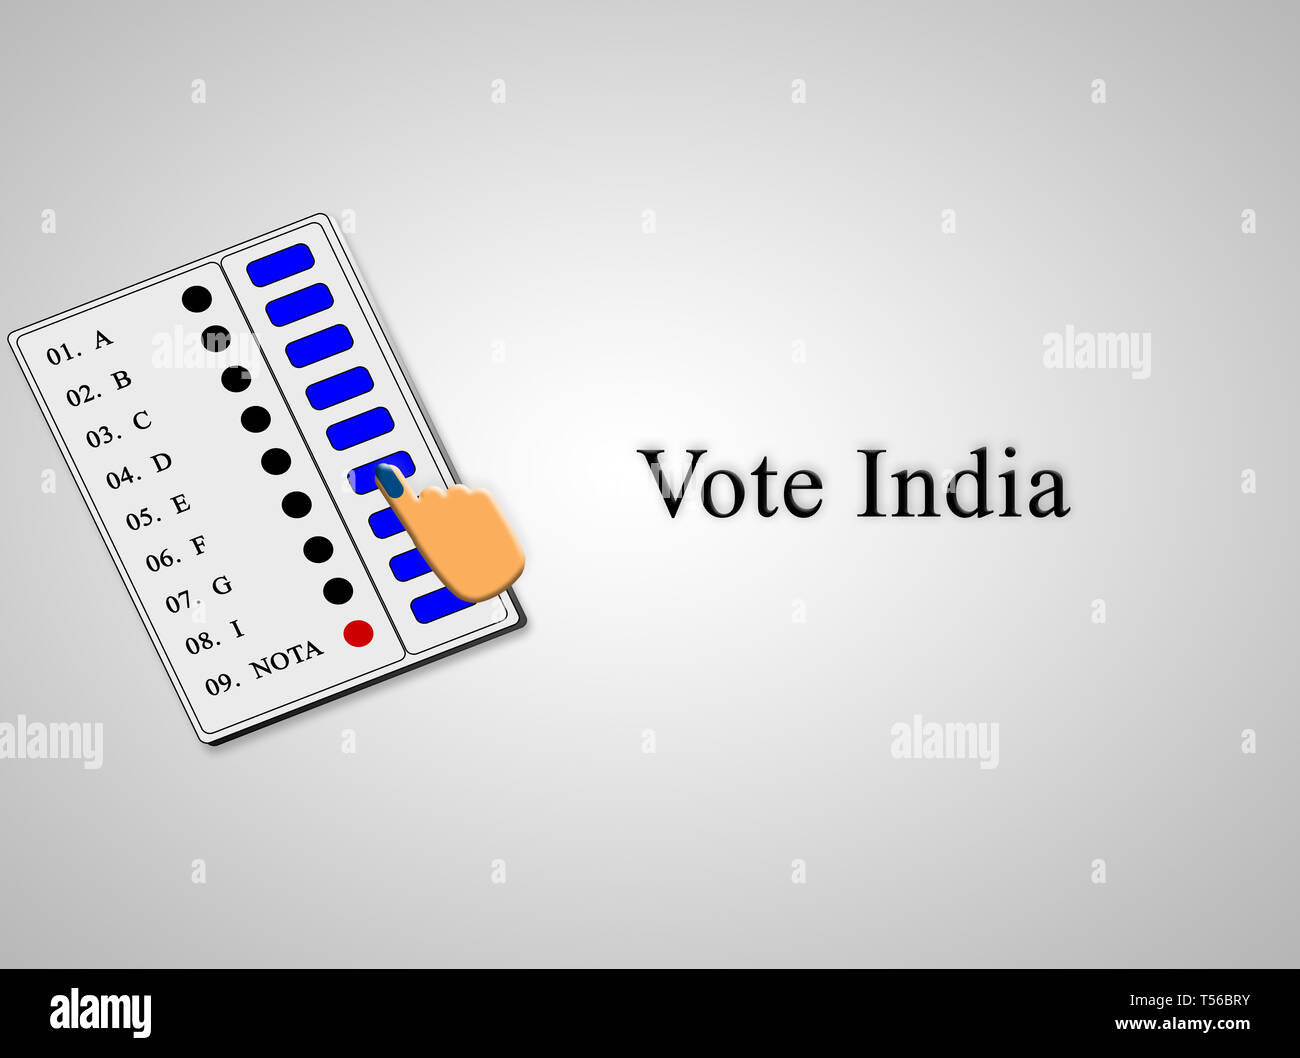 EVM Electronic Voting Machine used to cast the vote in Indian elections Stock Photo